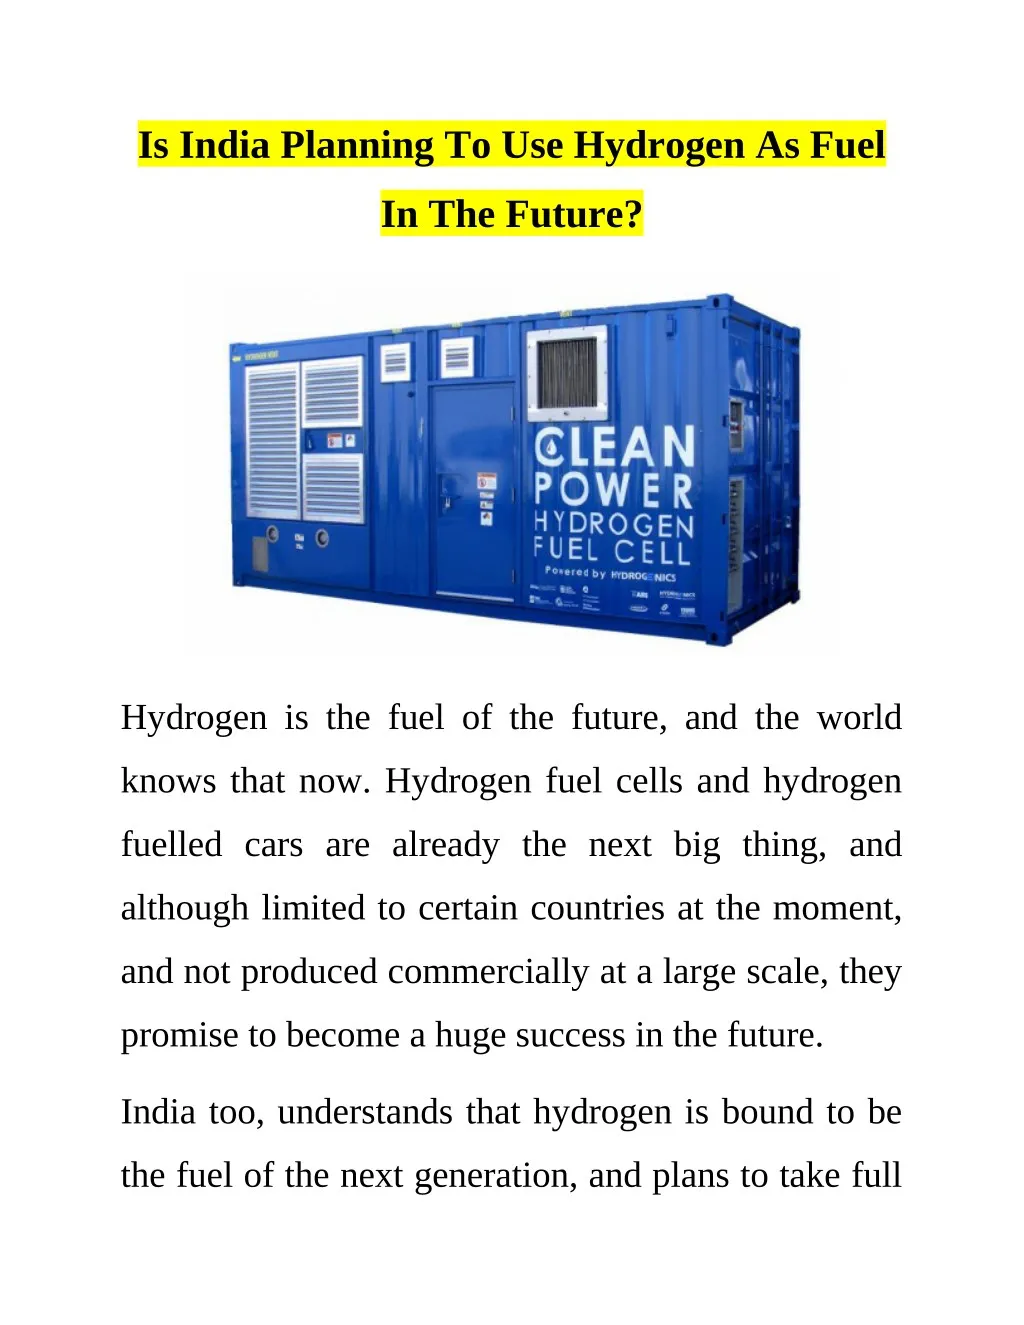 is india planning to use hydrogen as fuel